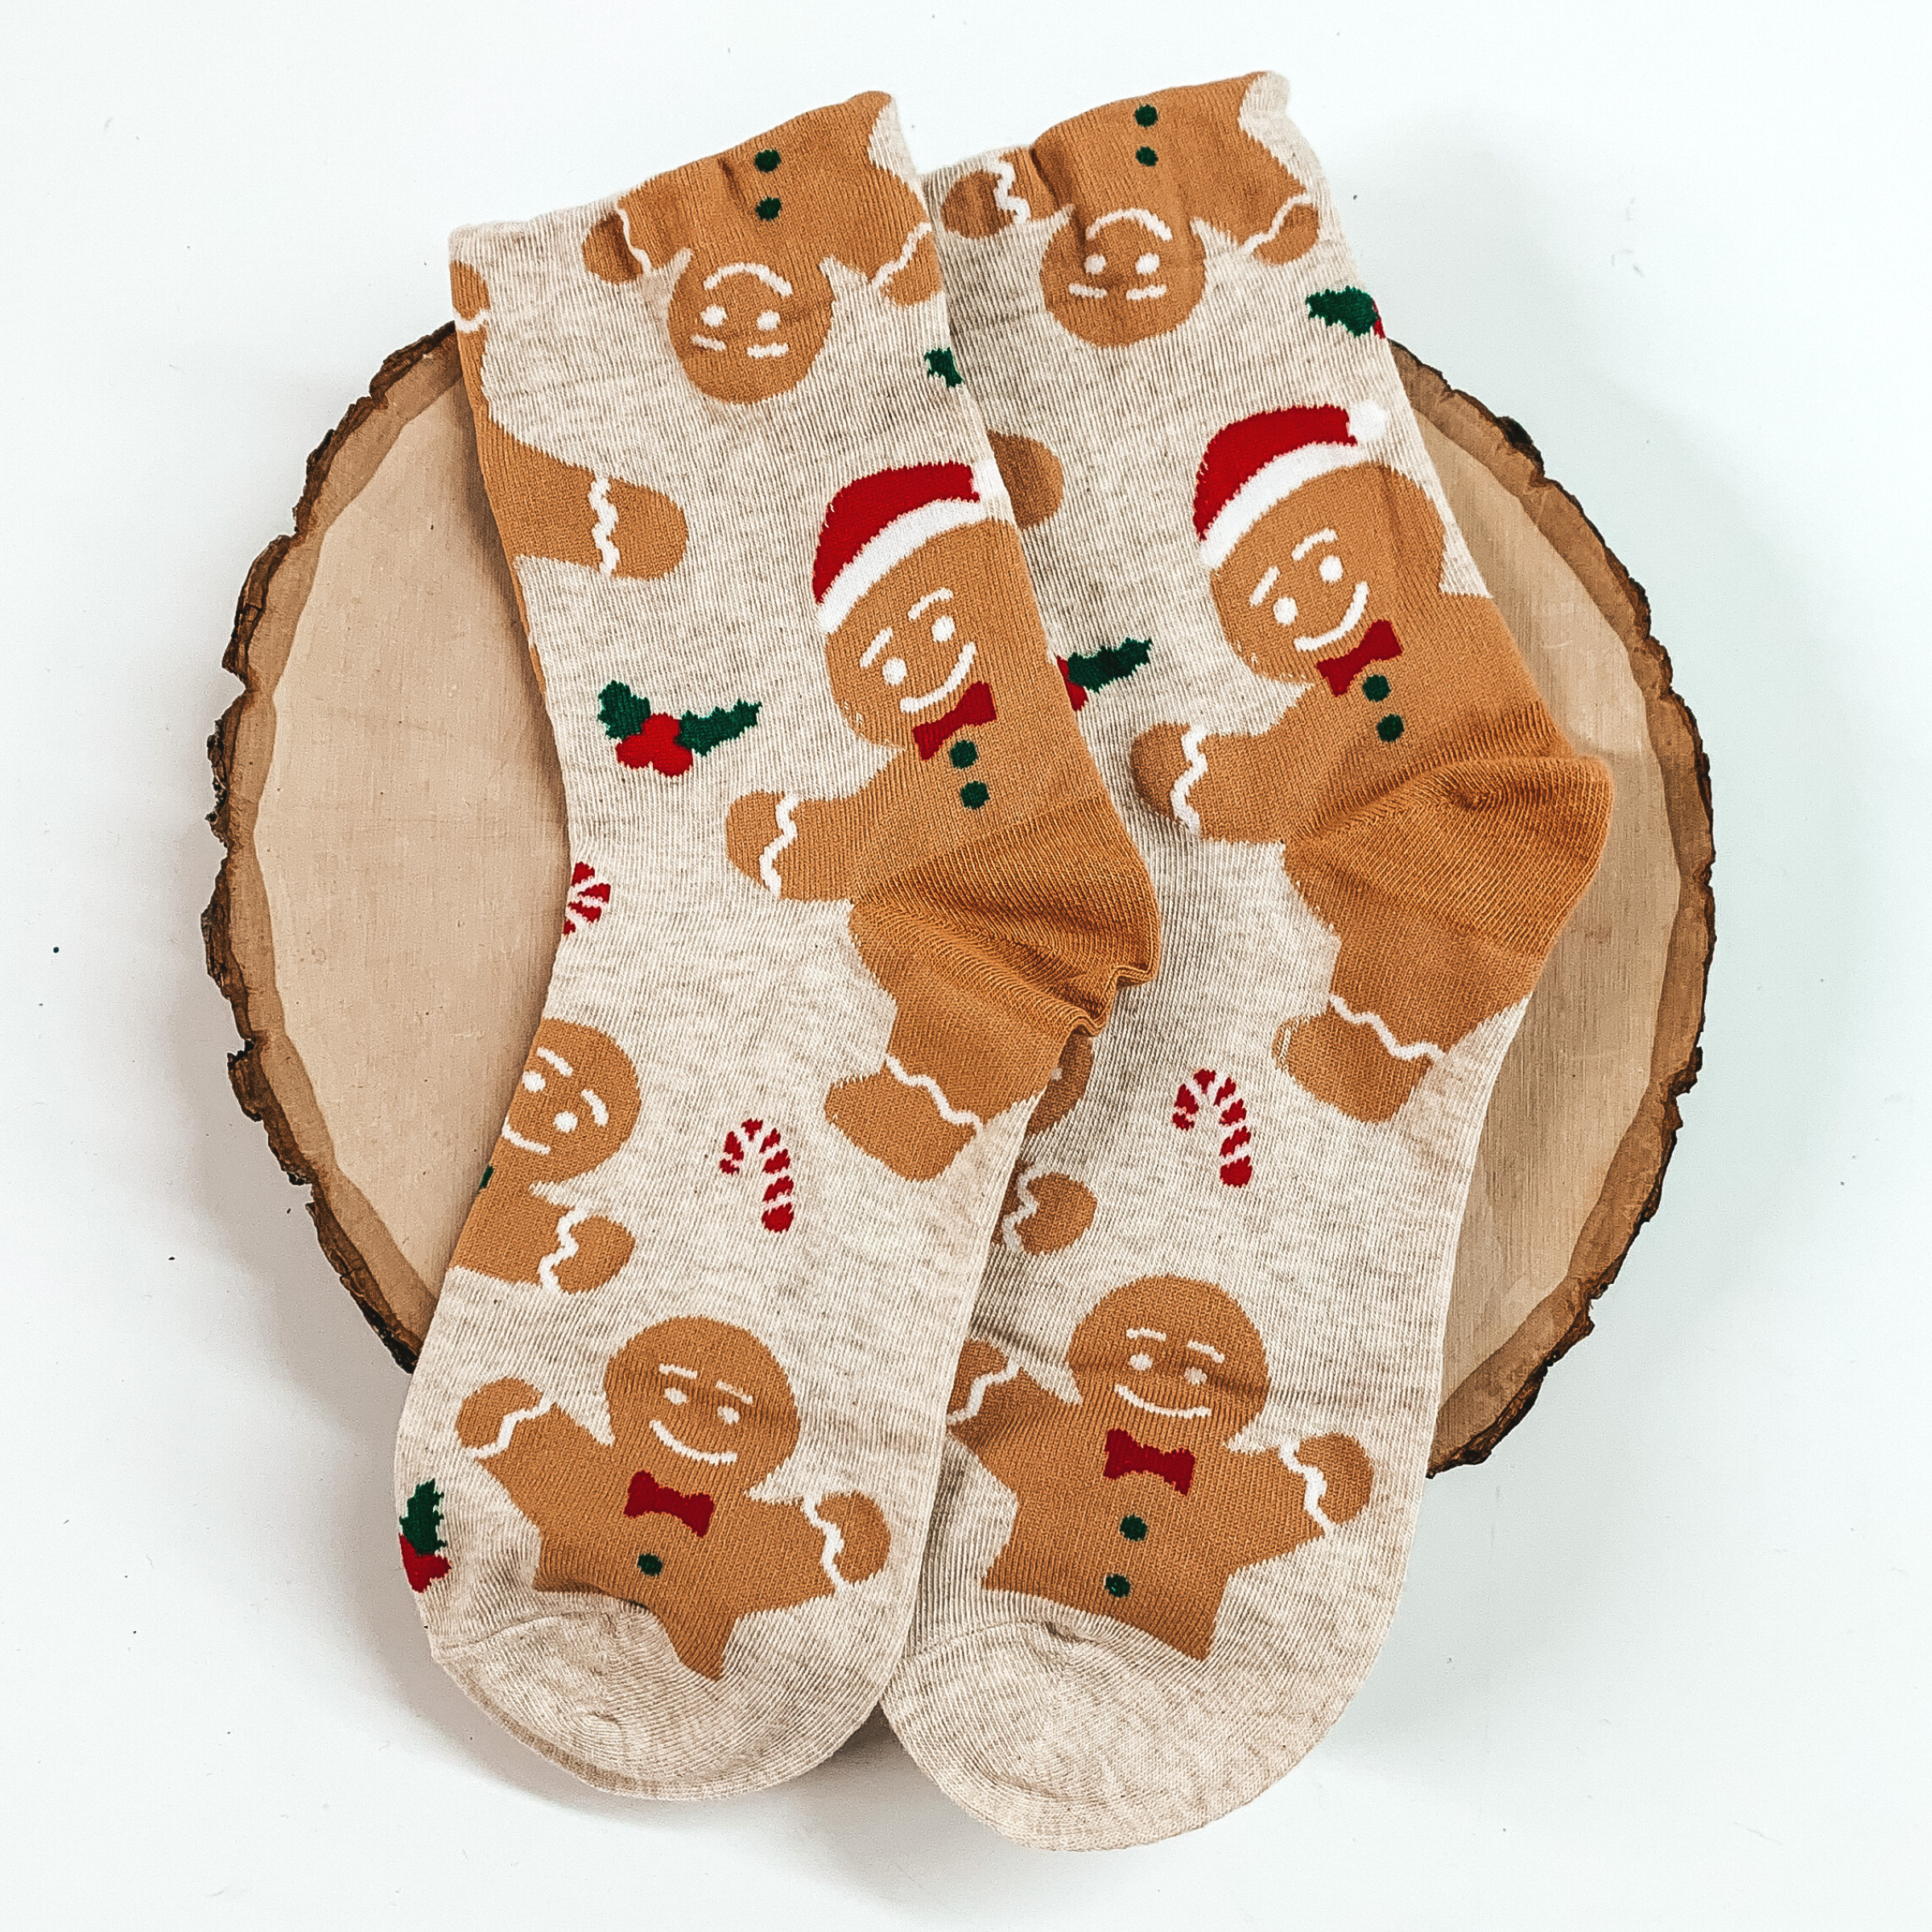 Beige ankle socks with a gingerbread print with candy canes and mistletoe. These socks are pictured on a piece of wood on a white background. 